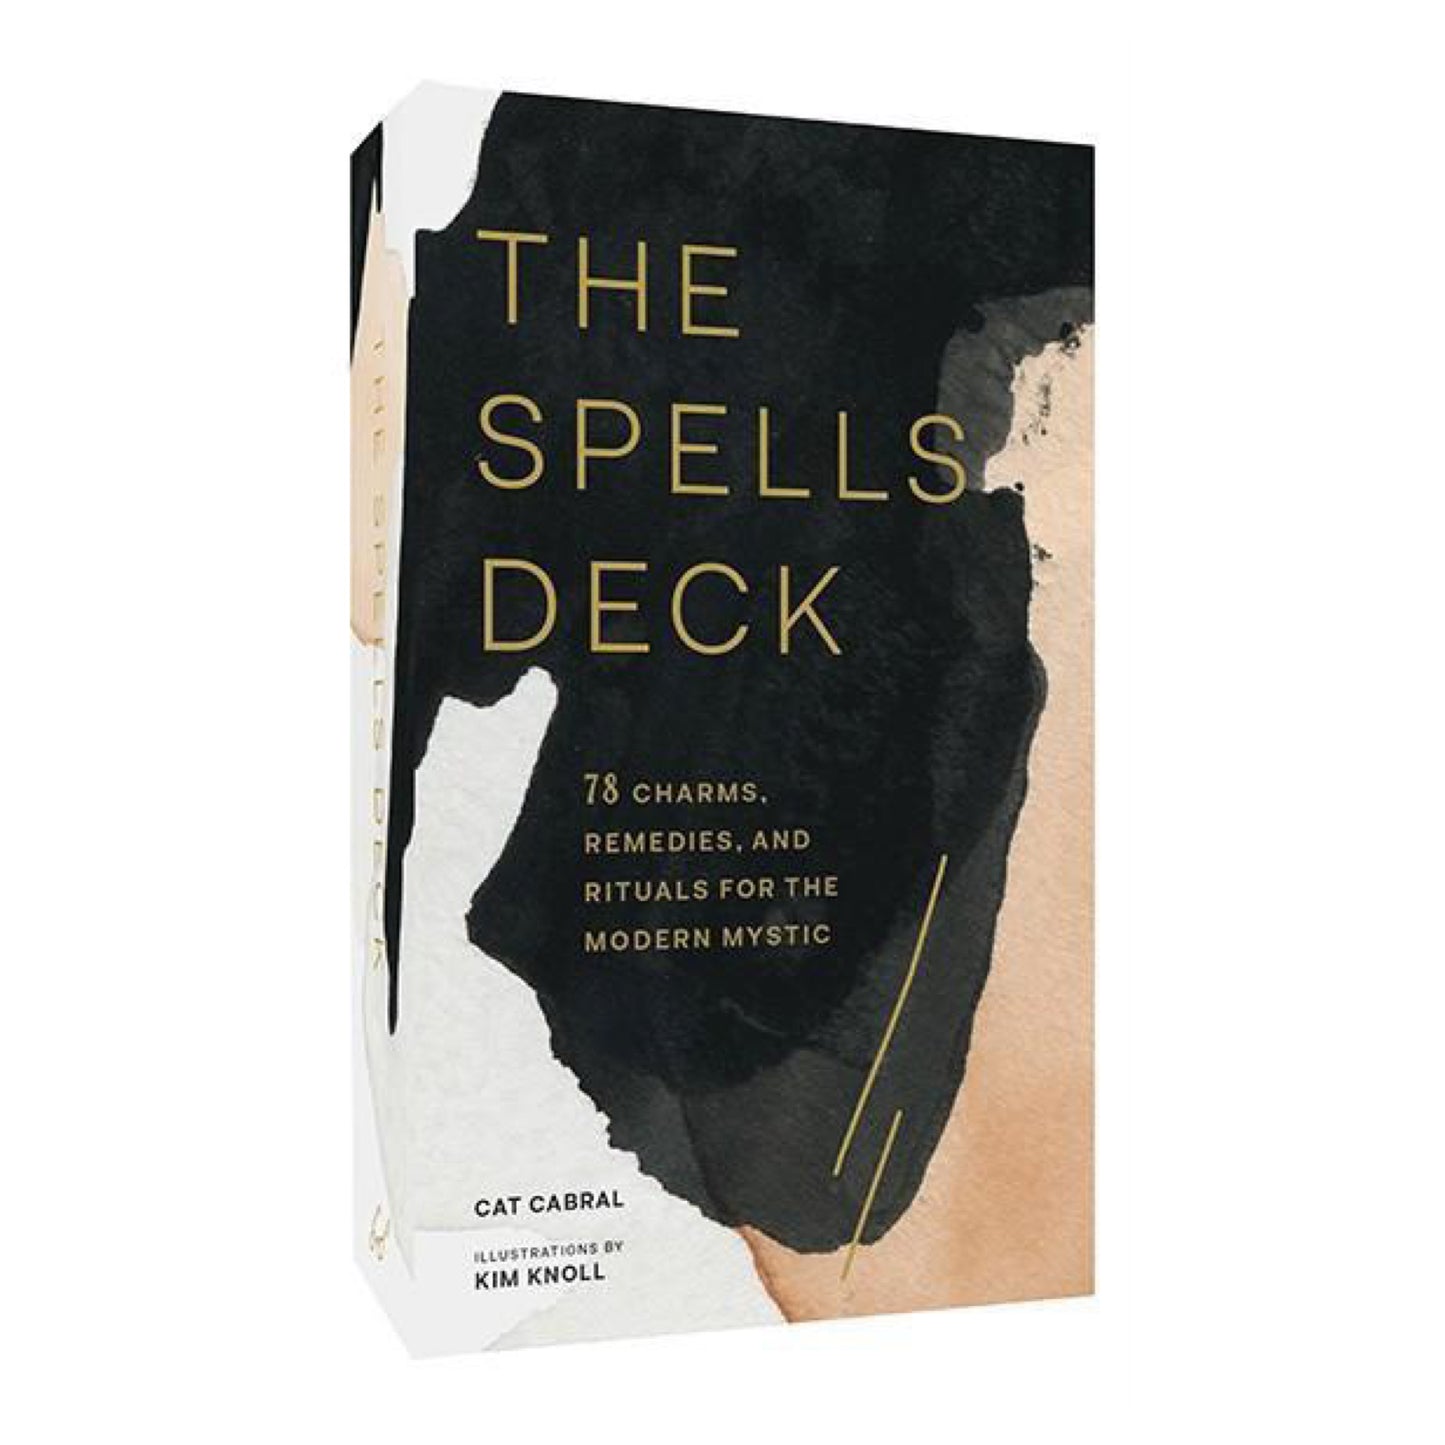 The Spells Deck: 78 Charms, Remedies, and Rituals for the Modern Mystic